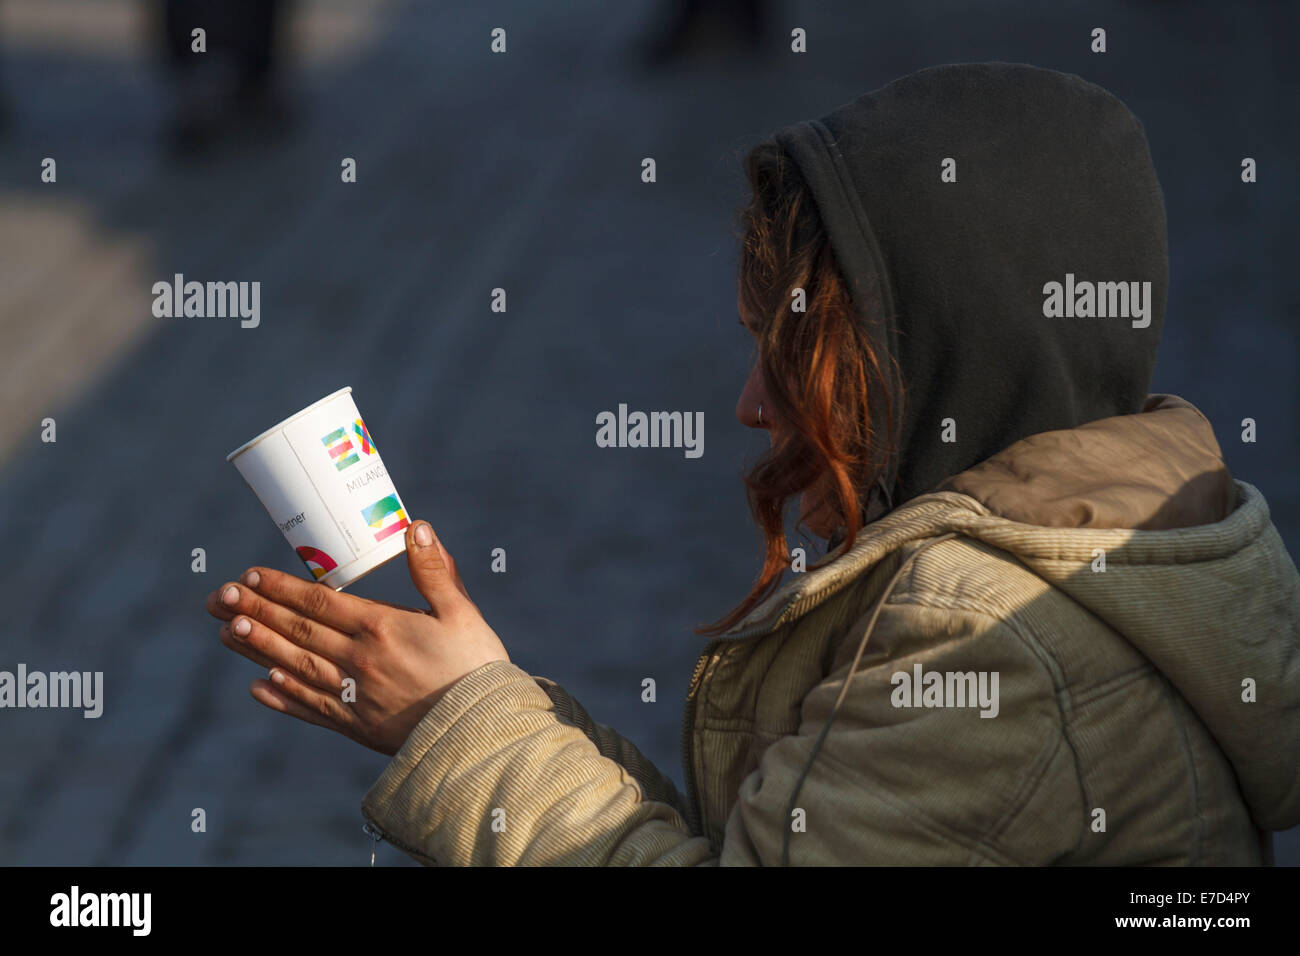 Beggar immigrant migrant refugee begging on street Stock Photo